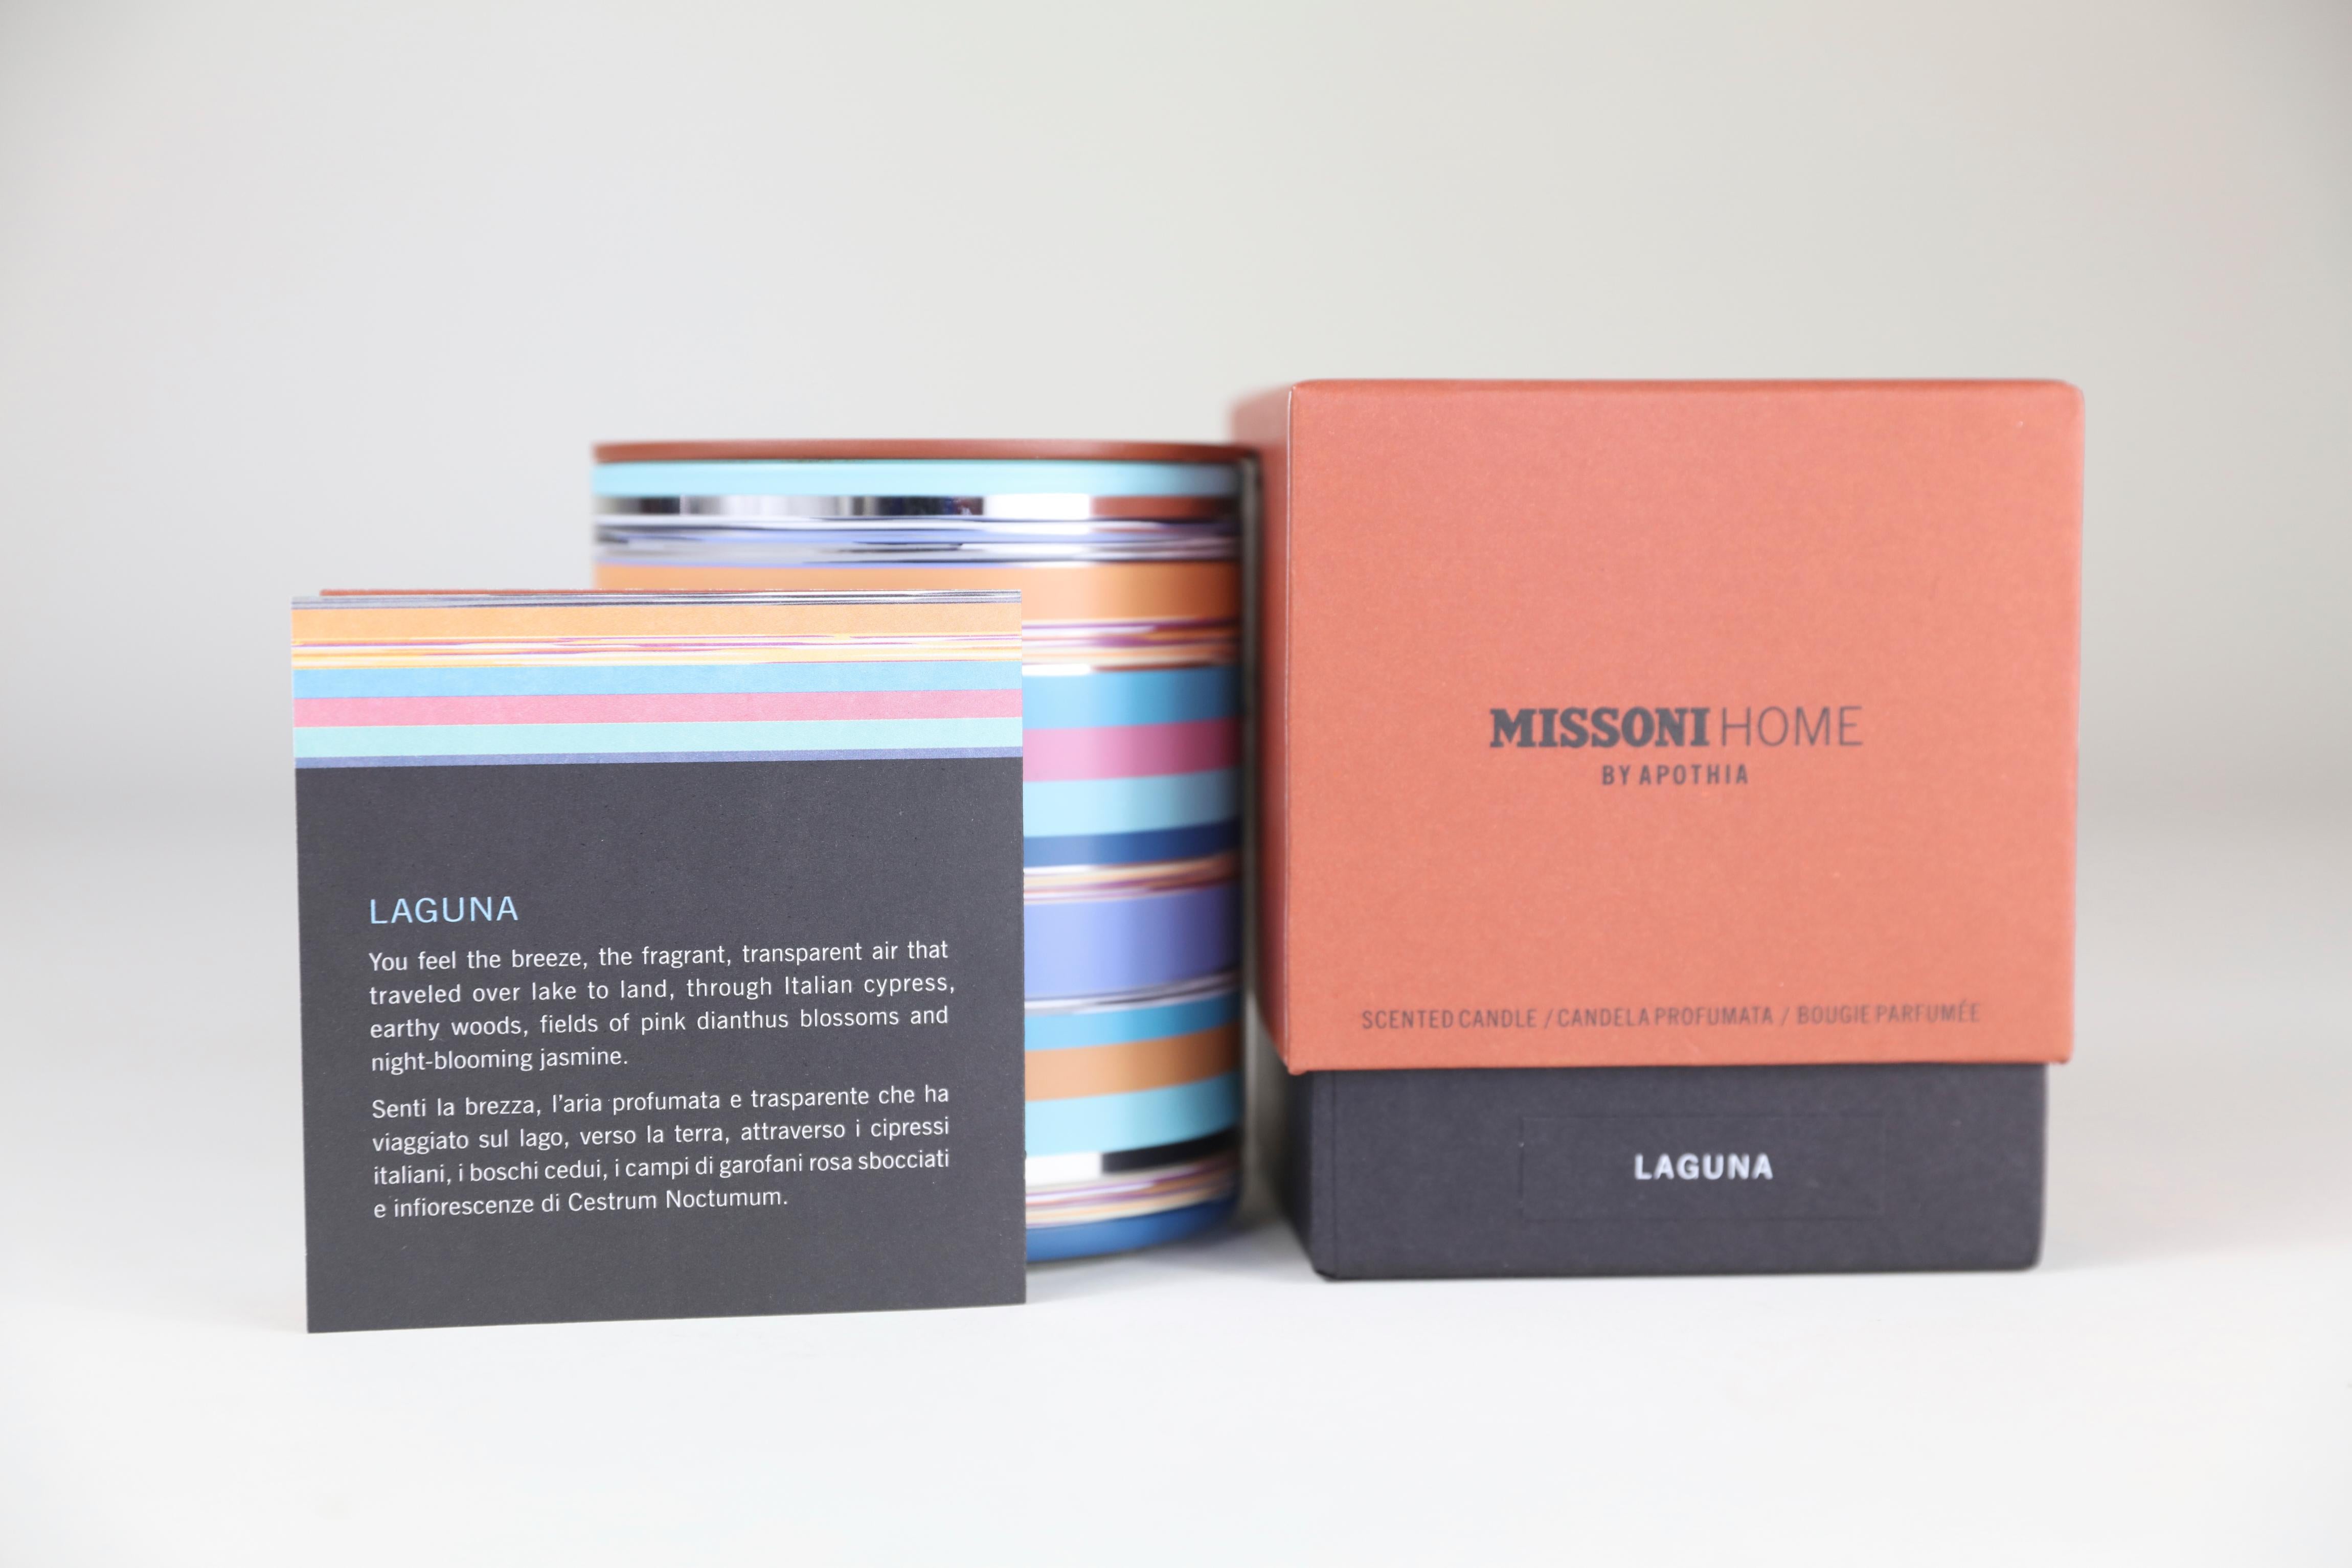 Missoni Laguna Candle with scents of fresh breeze, pink dianthus blossoms, and night-blooming jasmine.